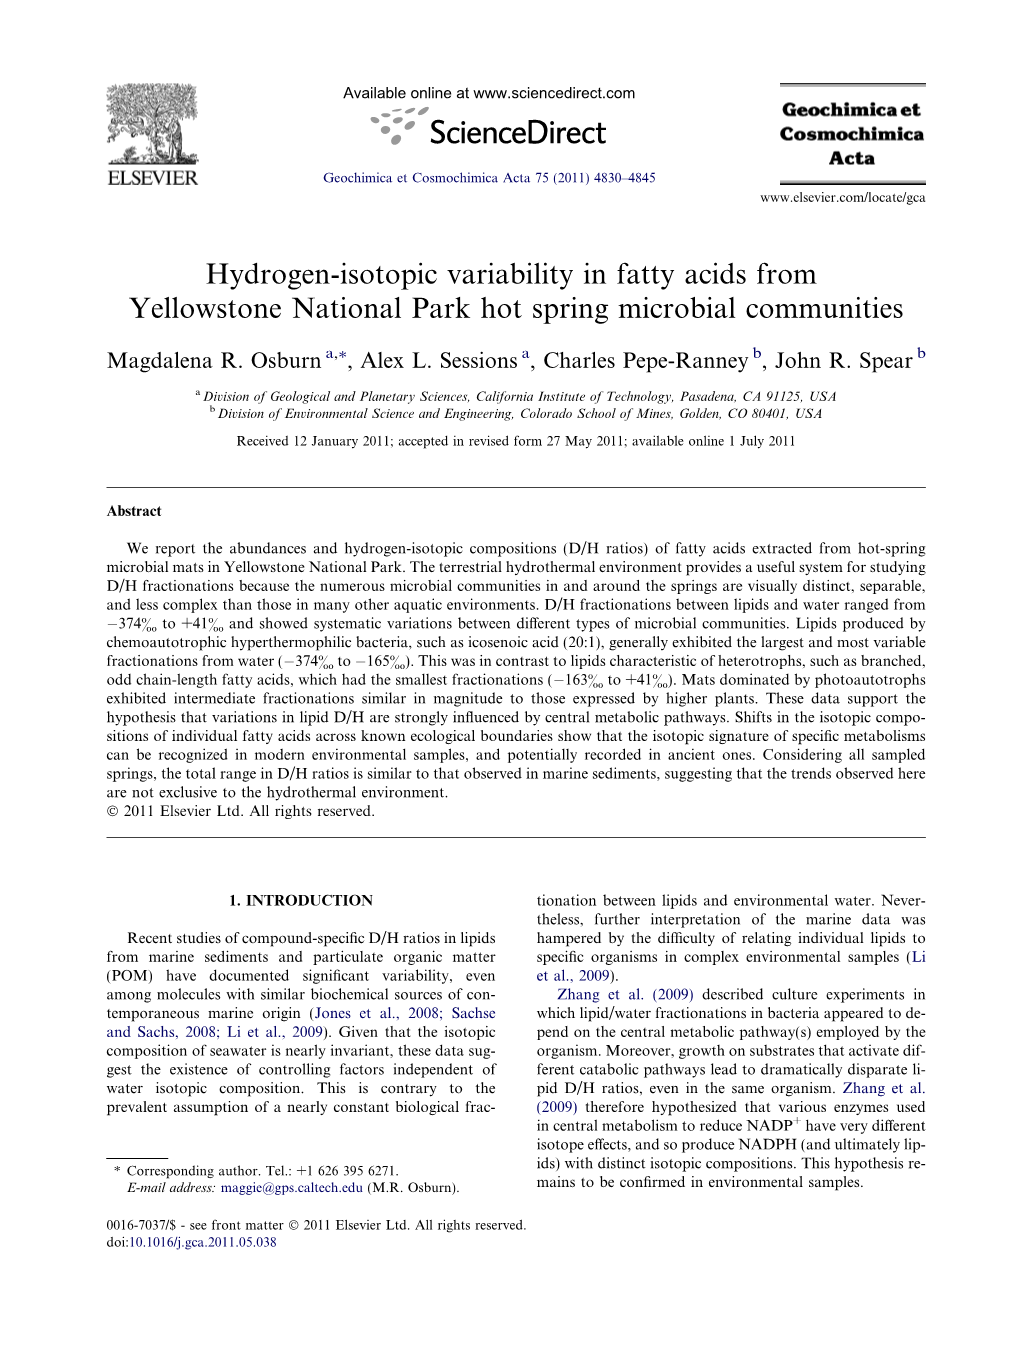 Hydrogen-Isotopic Variability in Fatty Acids from Yellowstone National Park Hot Spring Microbial Communities